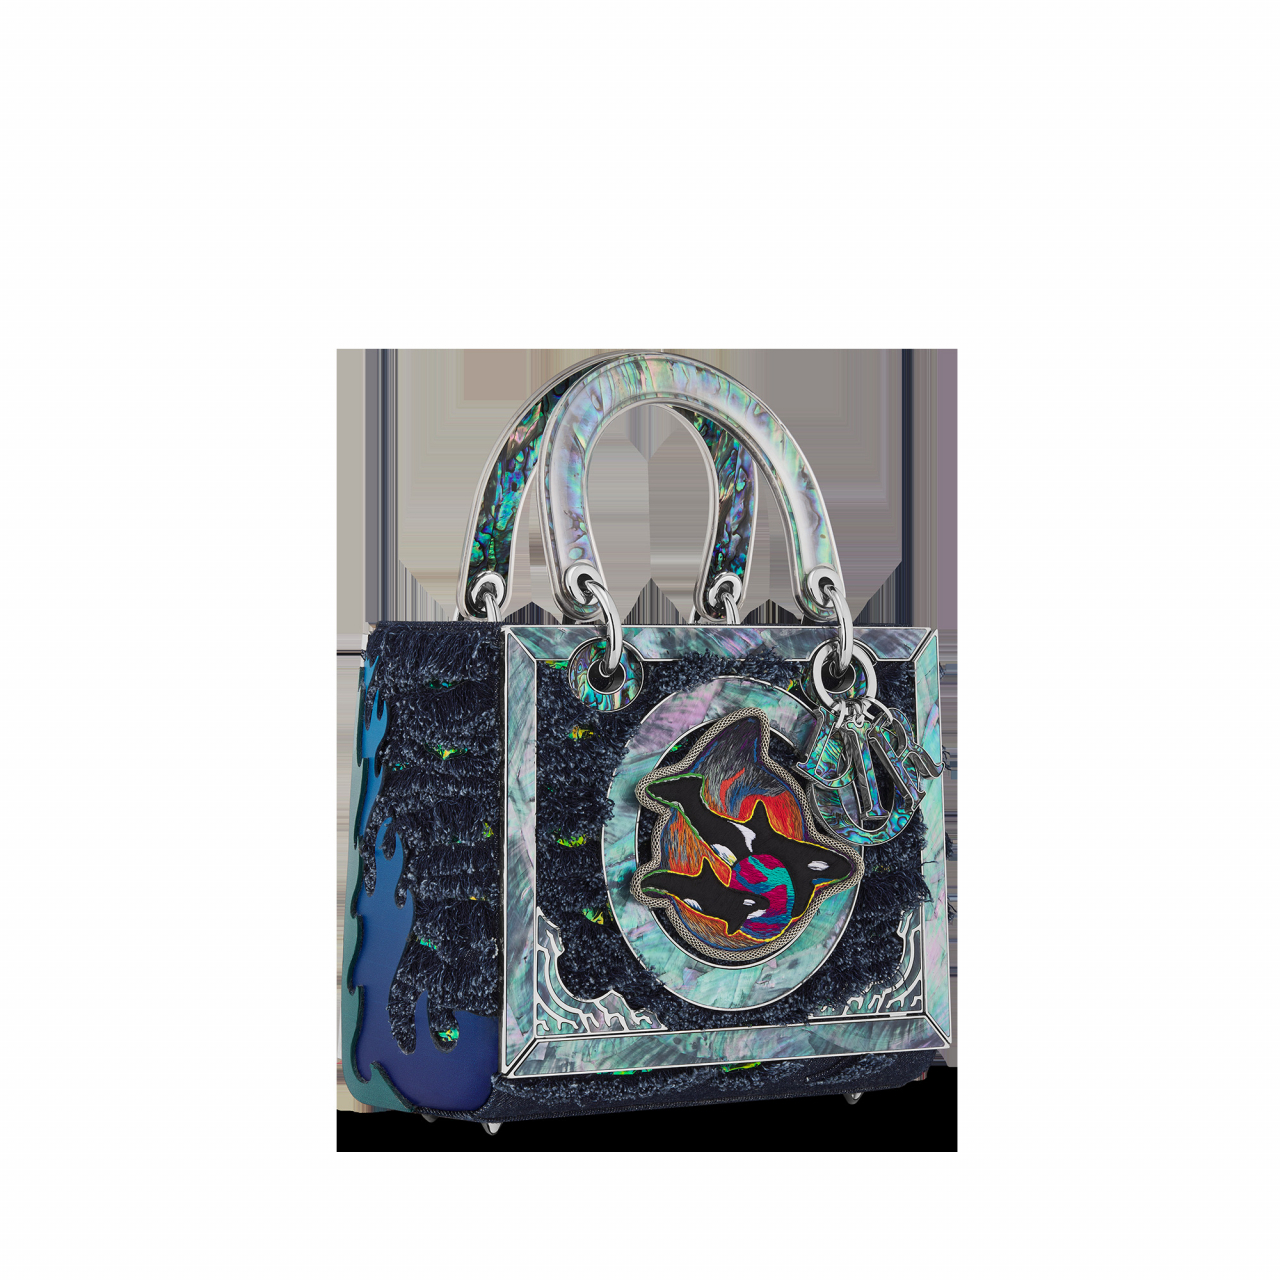 A Lady Dior bag made in collaboration with Zadie Xa for the eighth edition of the Dior Lady Art project (Courtesy of Dior)